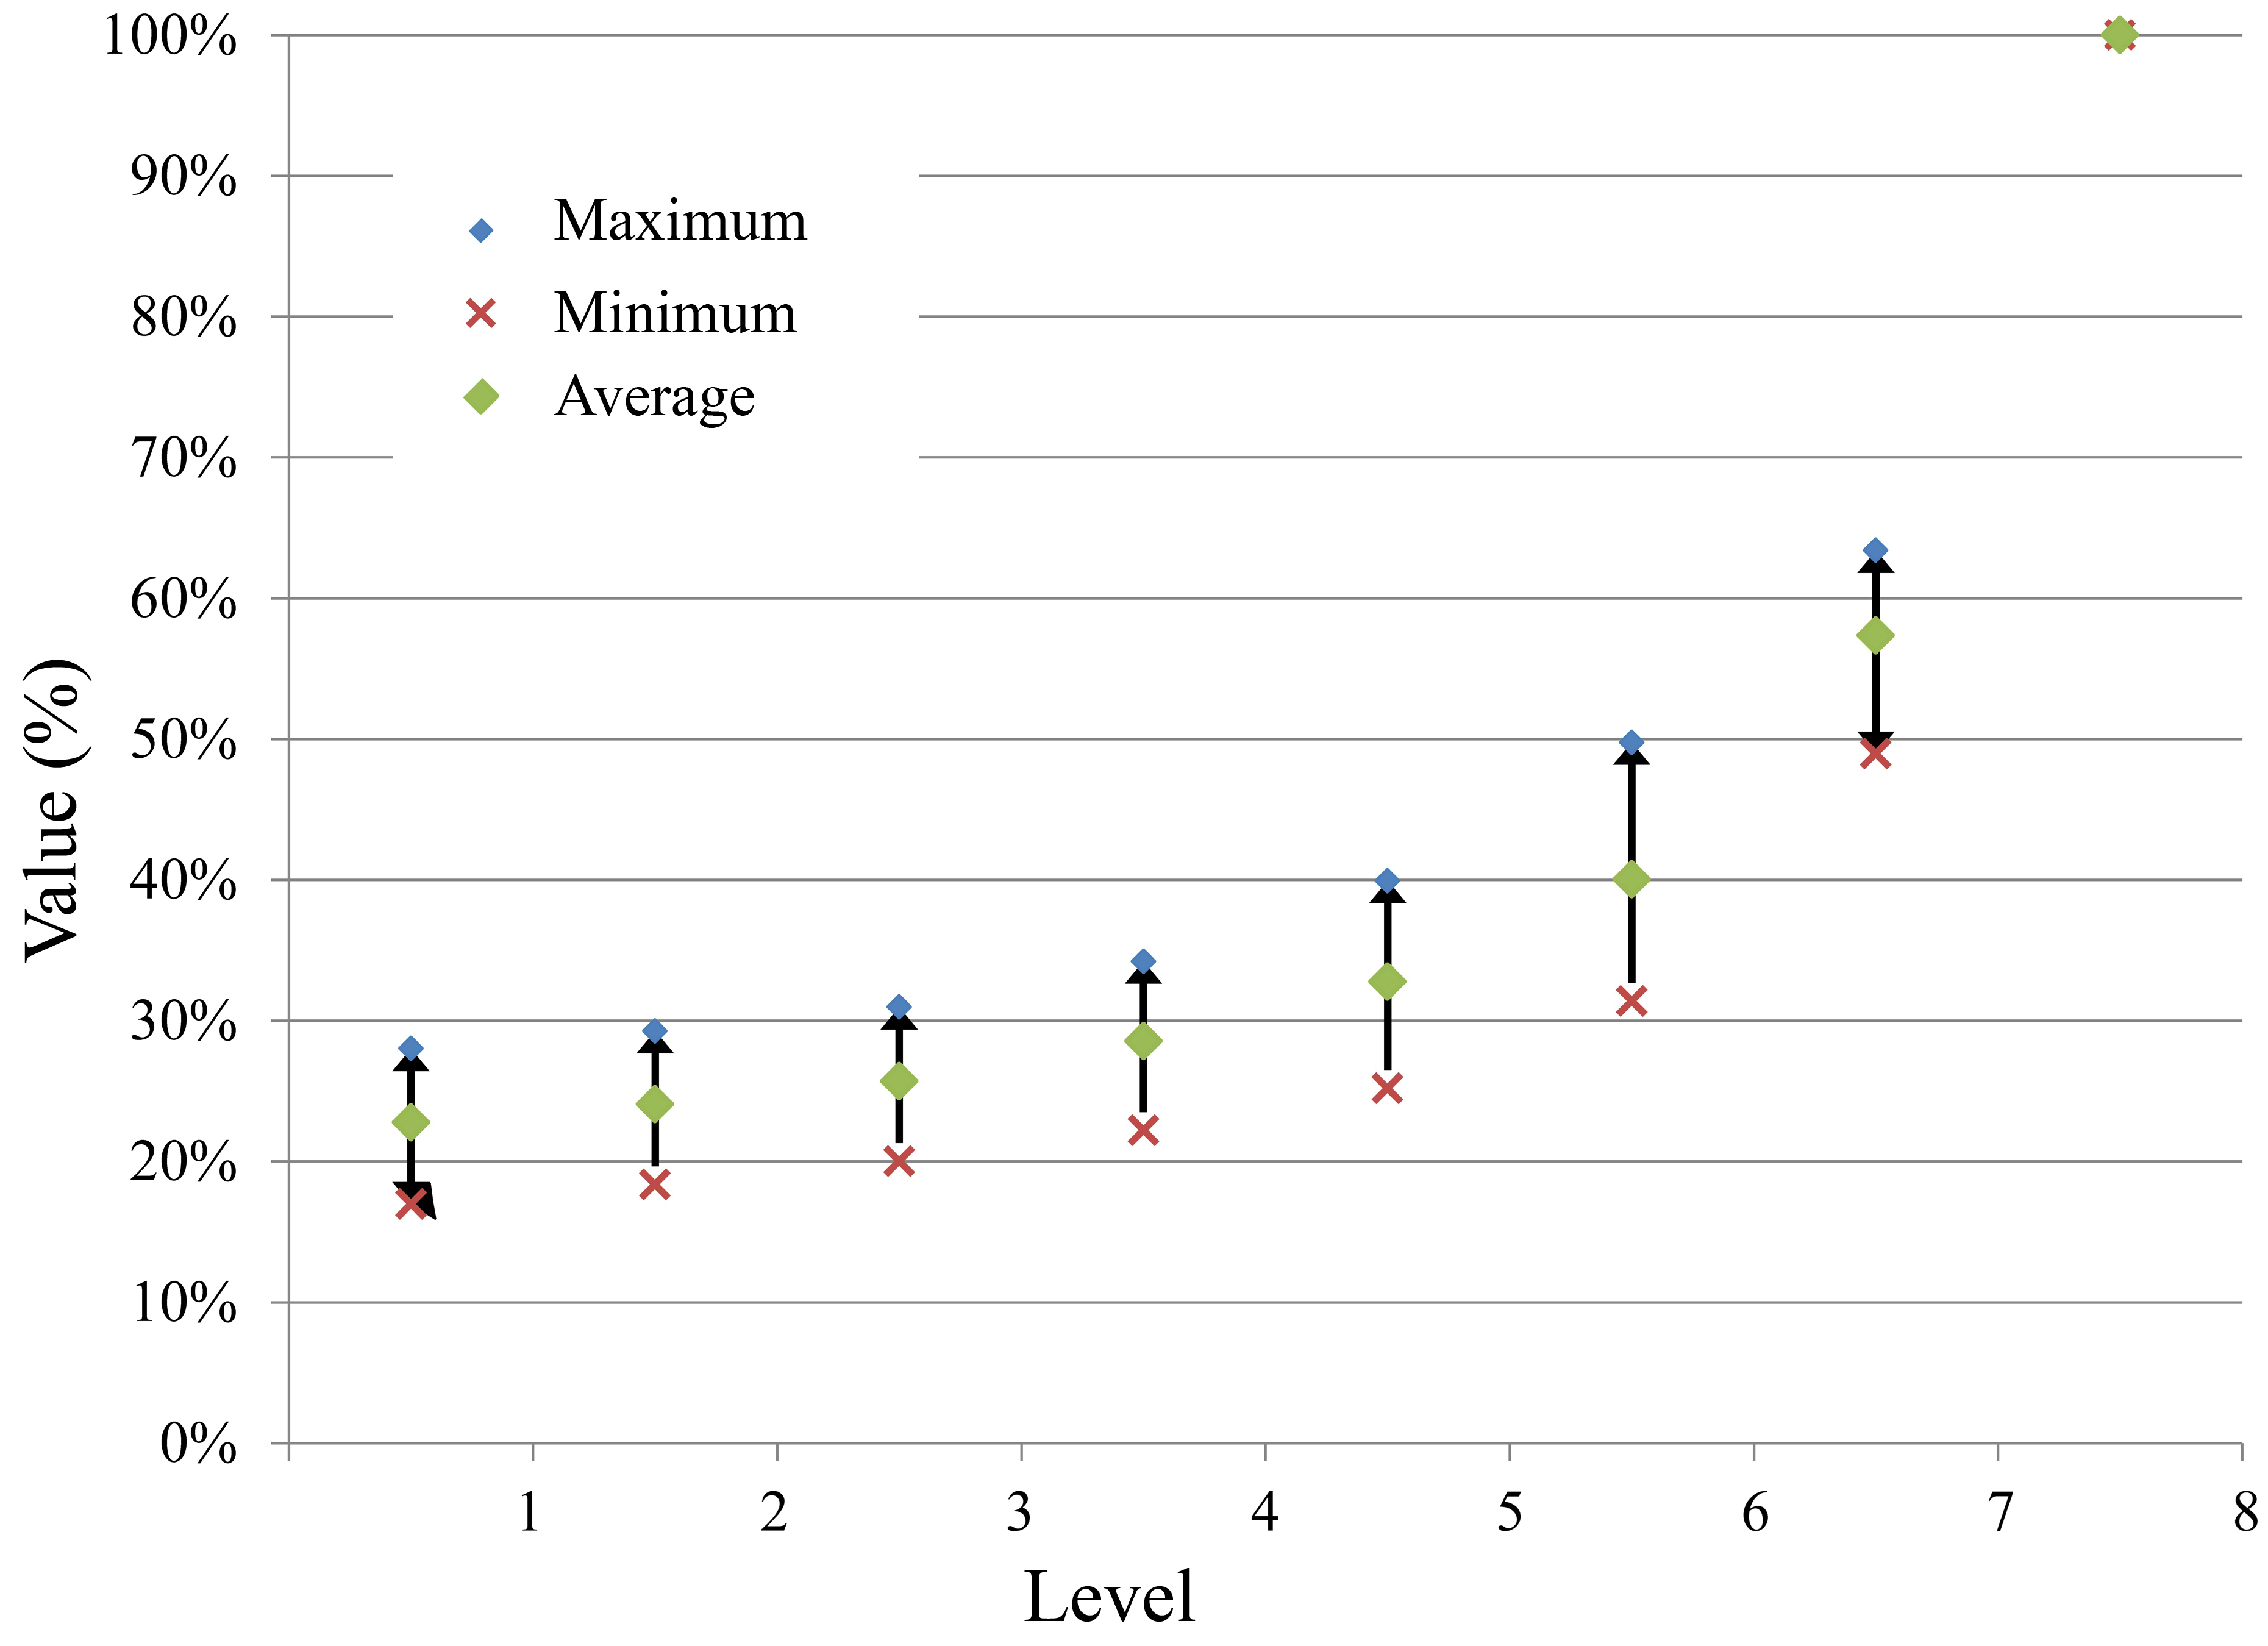 Comparison of maximum, average, and minimum illuminance value in each level of the various cities and illuminance observed in the 8th floor.